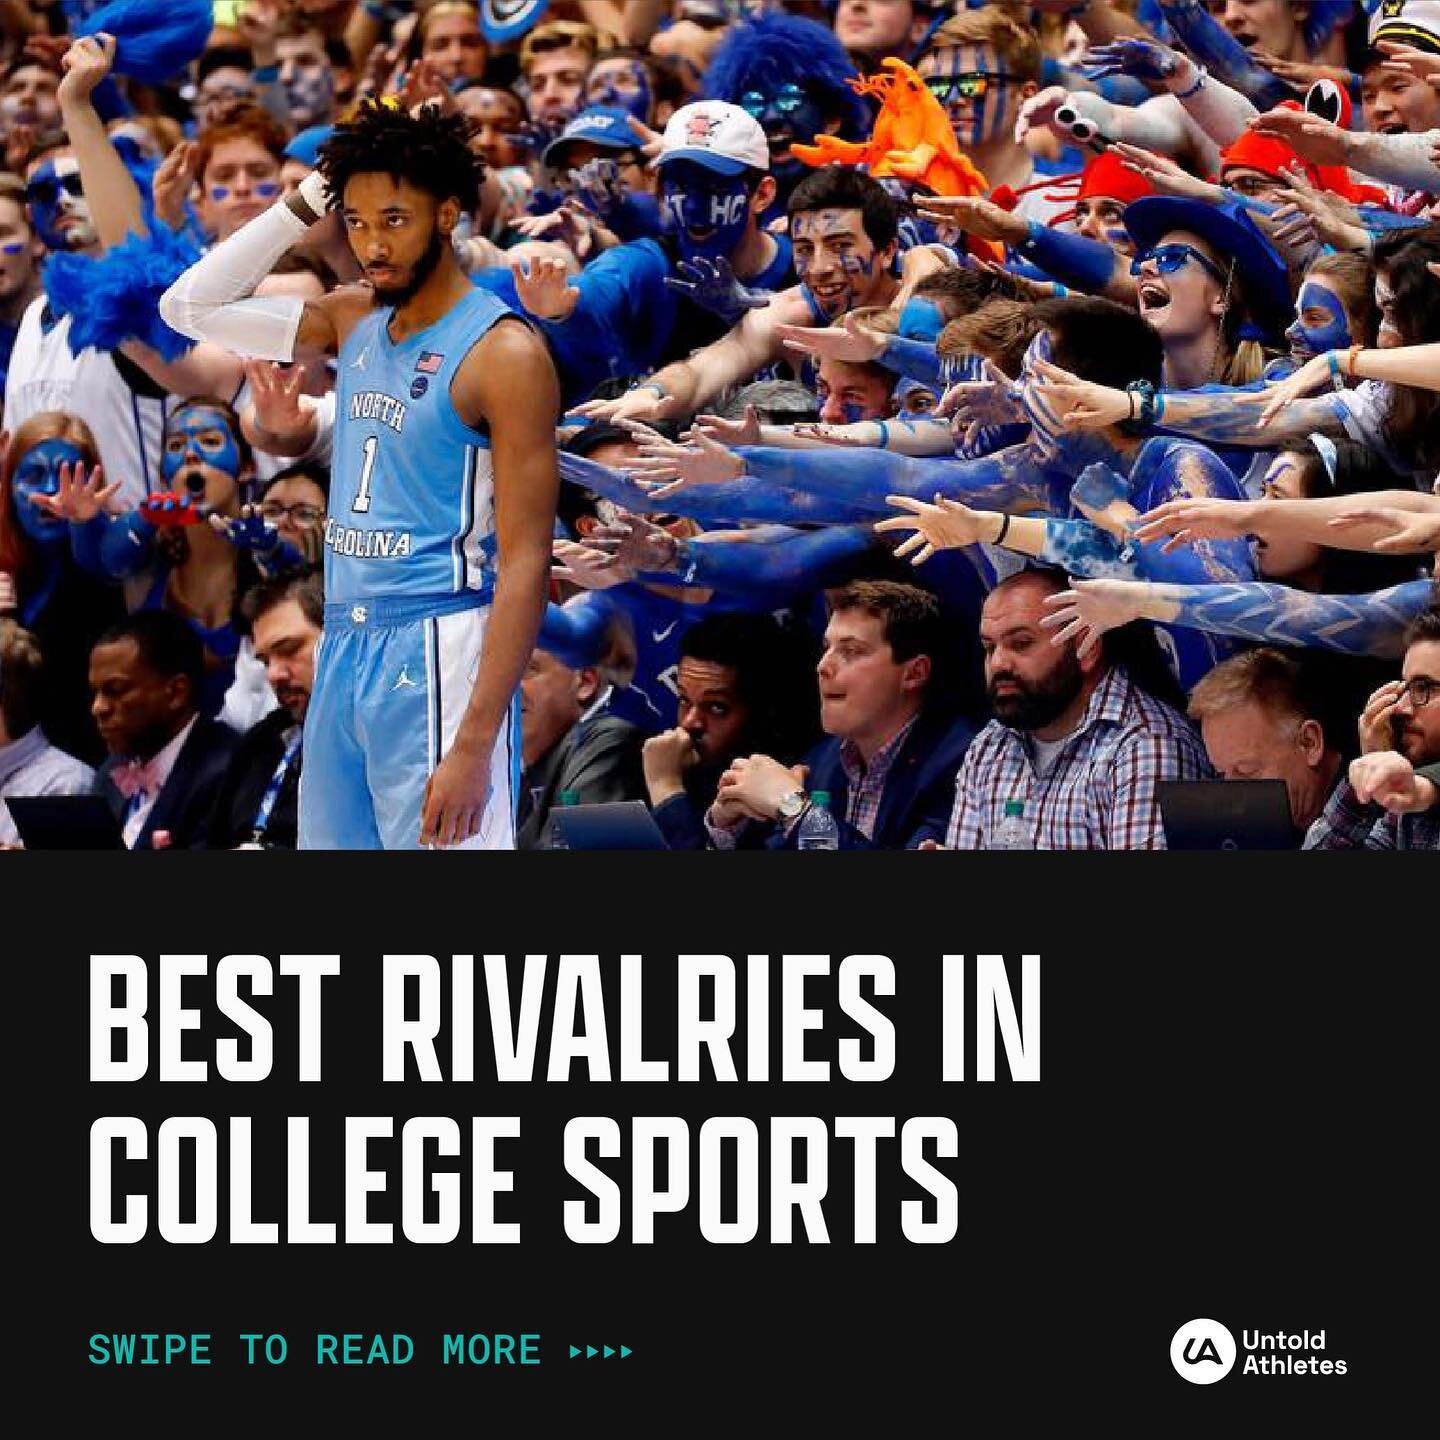 What&rsquo;s the best rivalry on this list?